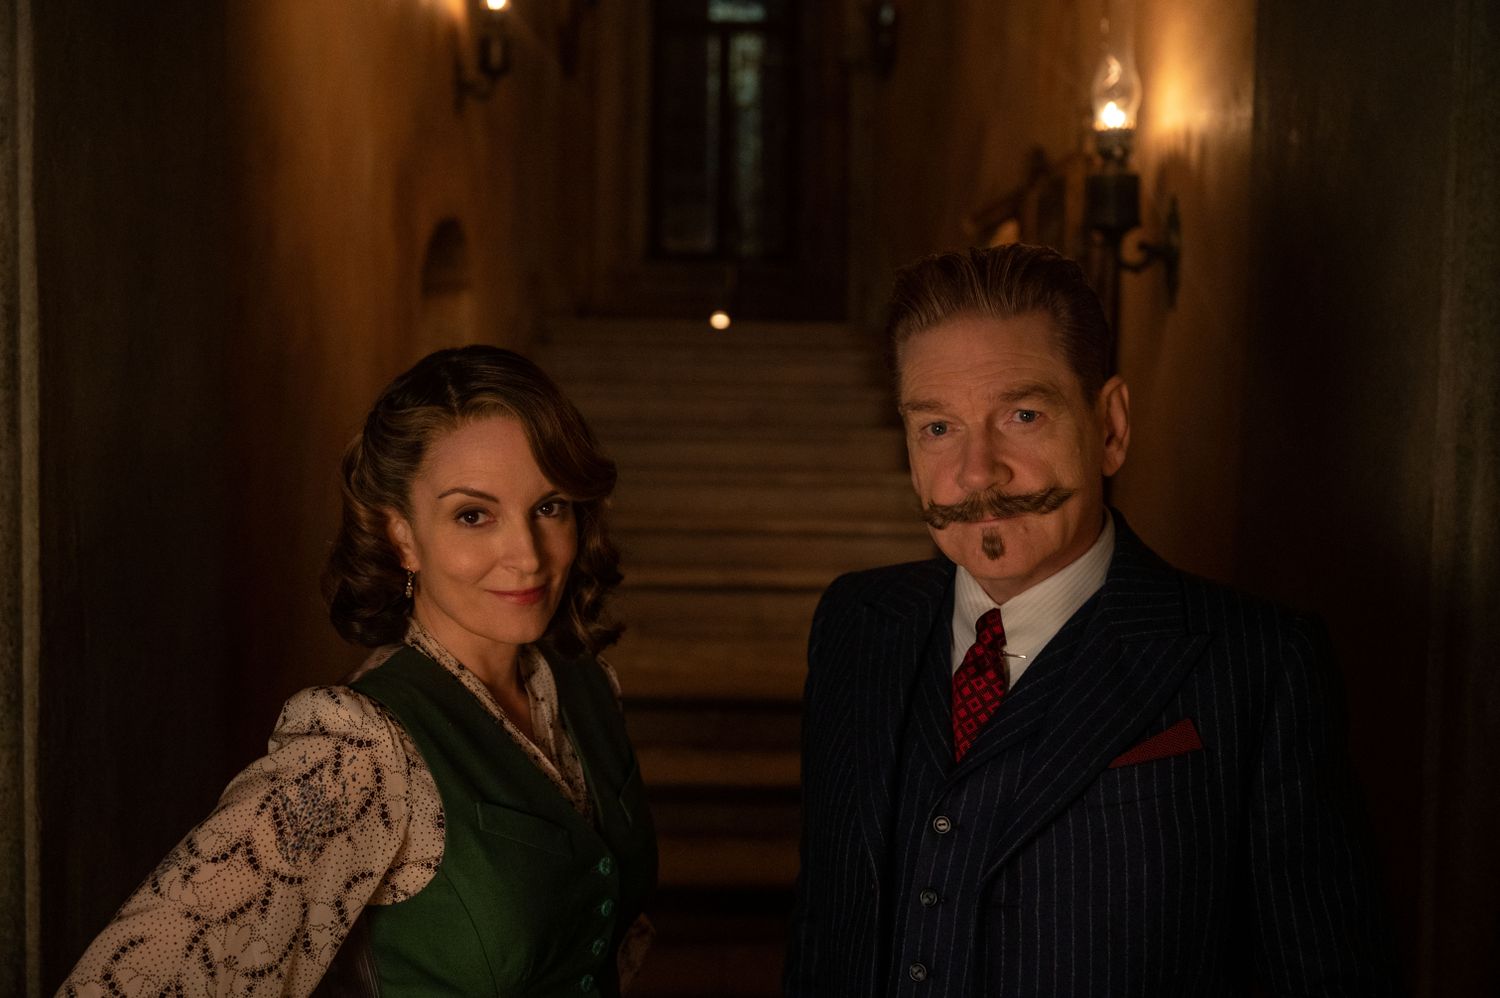 Kenneth Branagh's Ghostly Twist: Behind 'A Haunting in Venice' with Star Cast Reveals